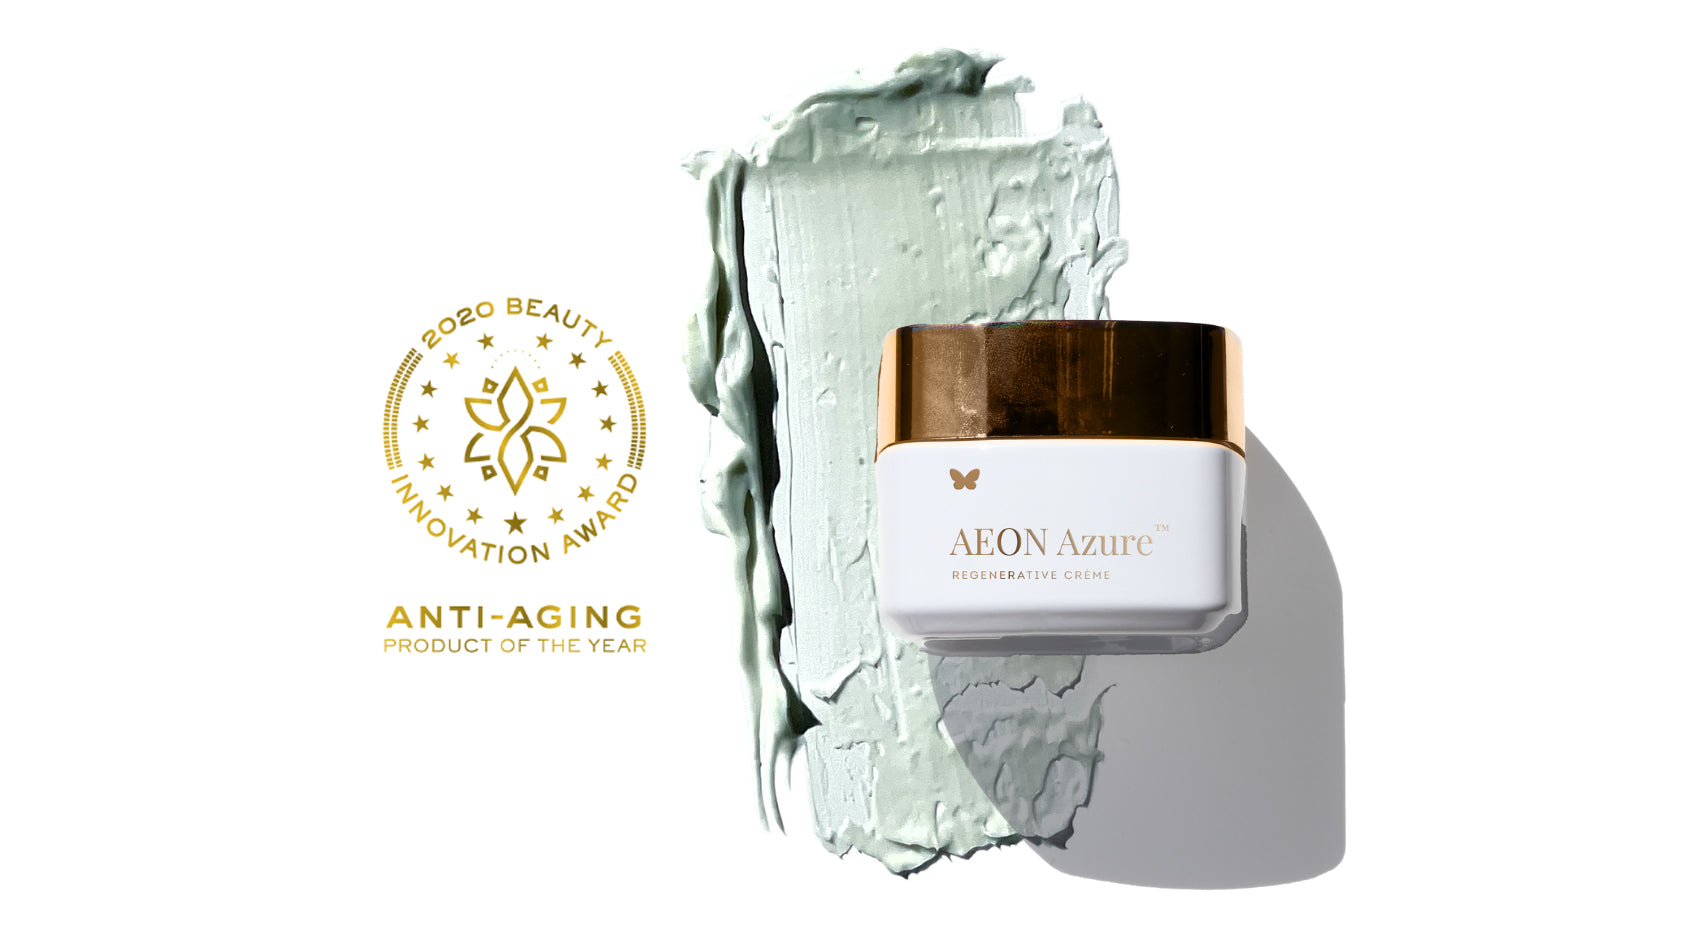 AEON - Anti-Aging Product of the Year